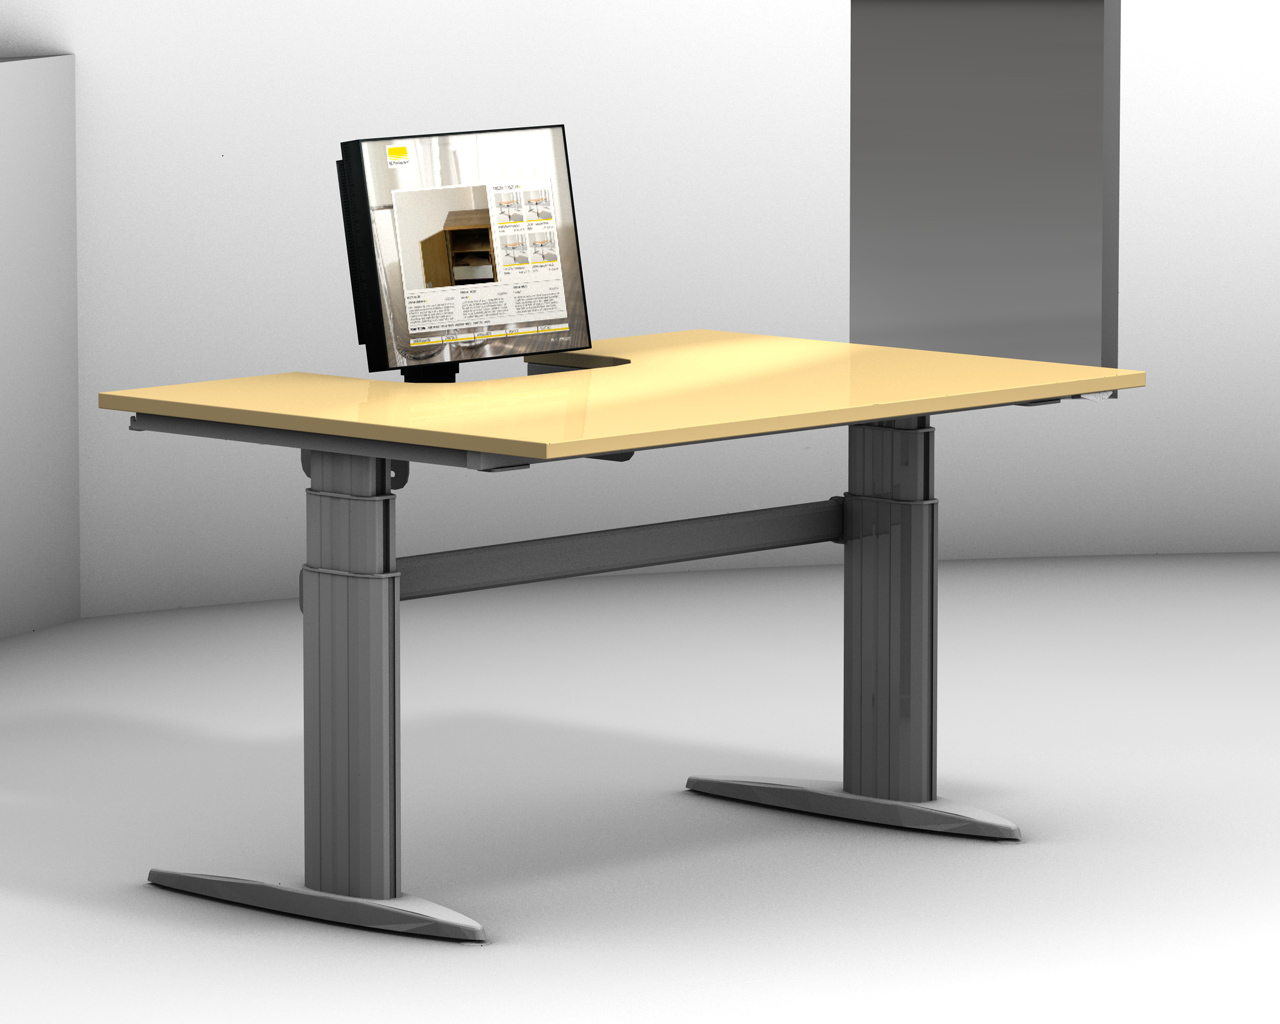 BZ Plankenhorn products - your specialist for office desks and height-adjustable stand and sit solutions.